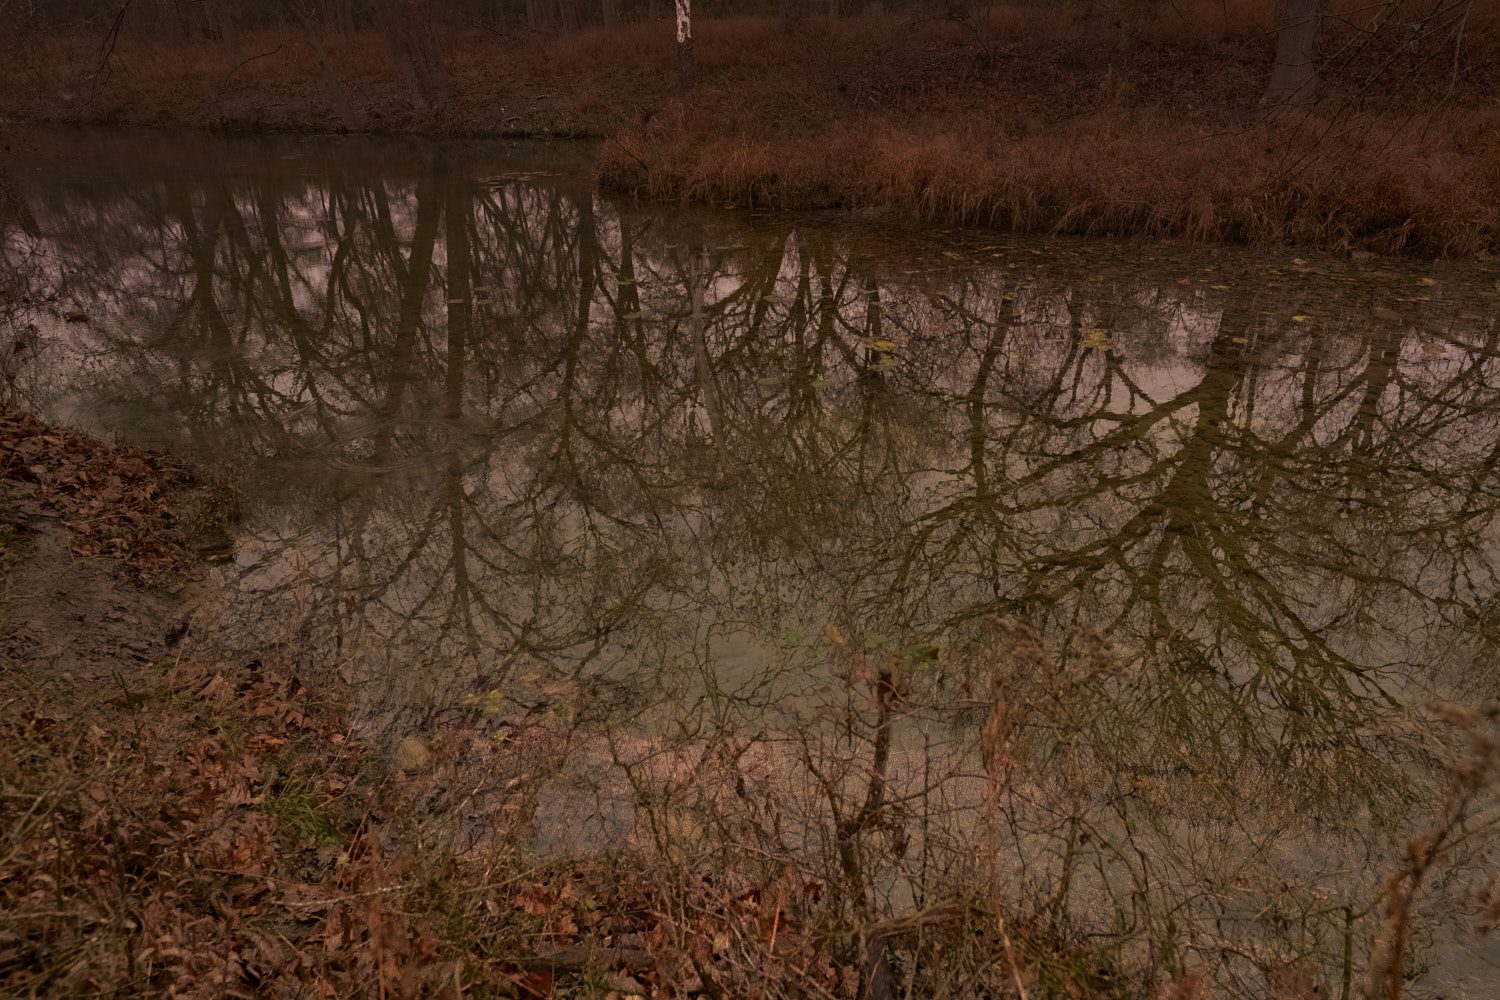 Reflection in the stream #1